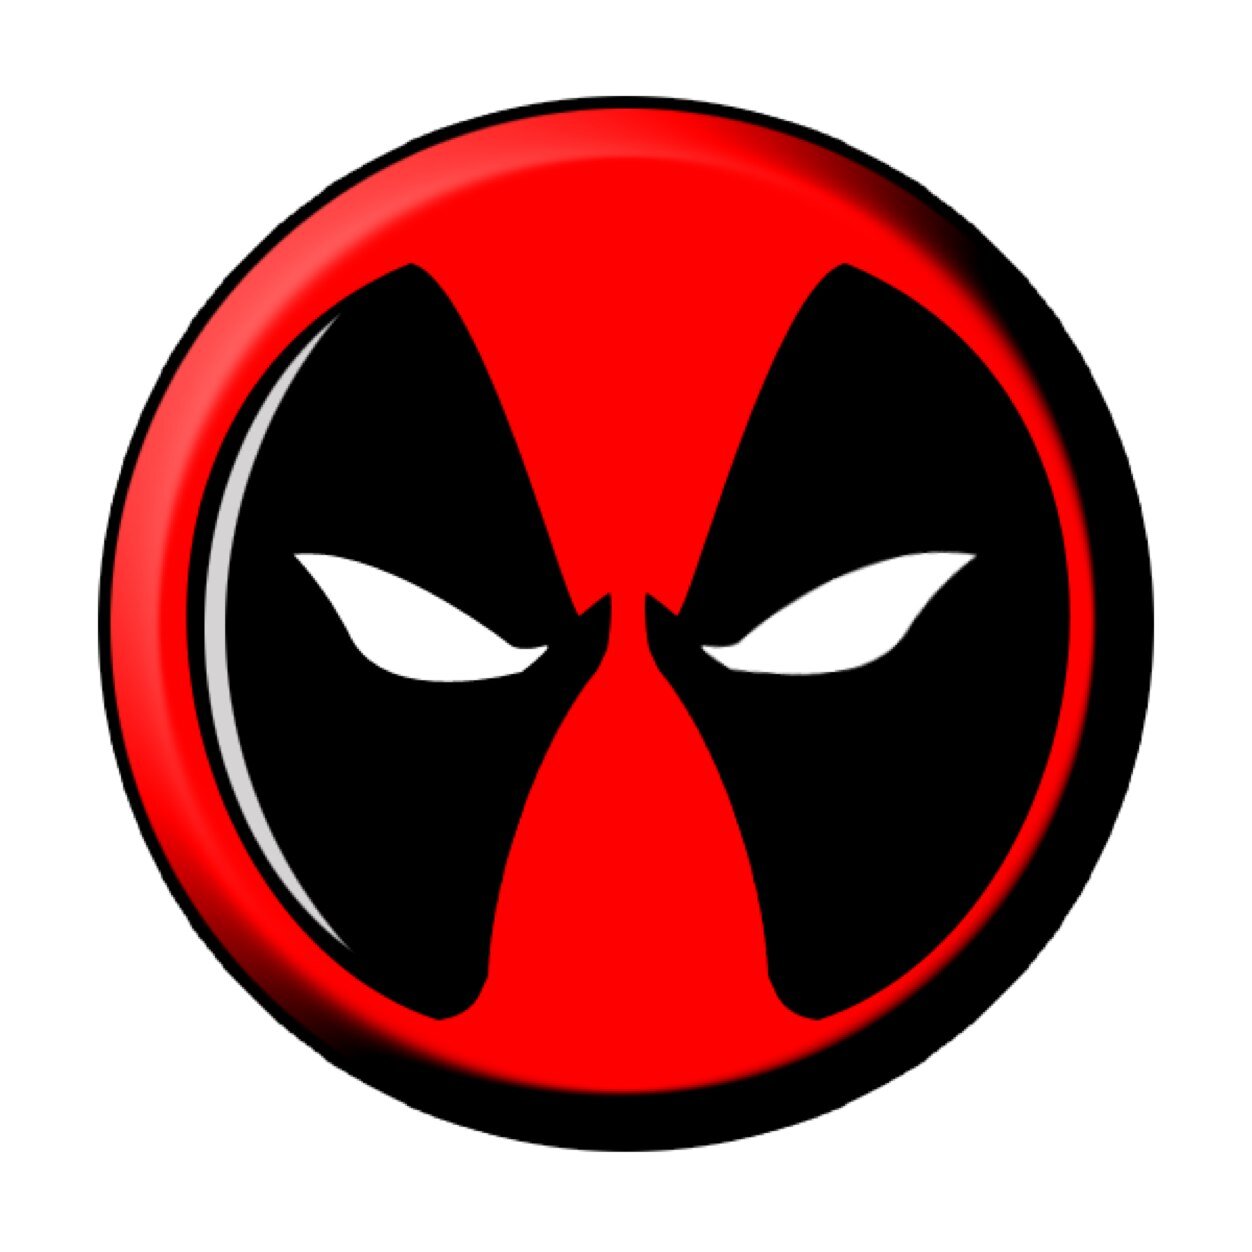 Cool Red And Black Deadpool Symbol Tattoo Design By Steven Deturo